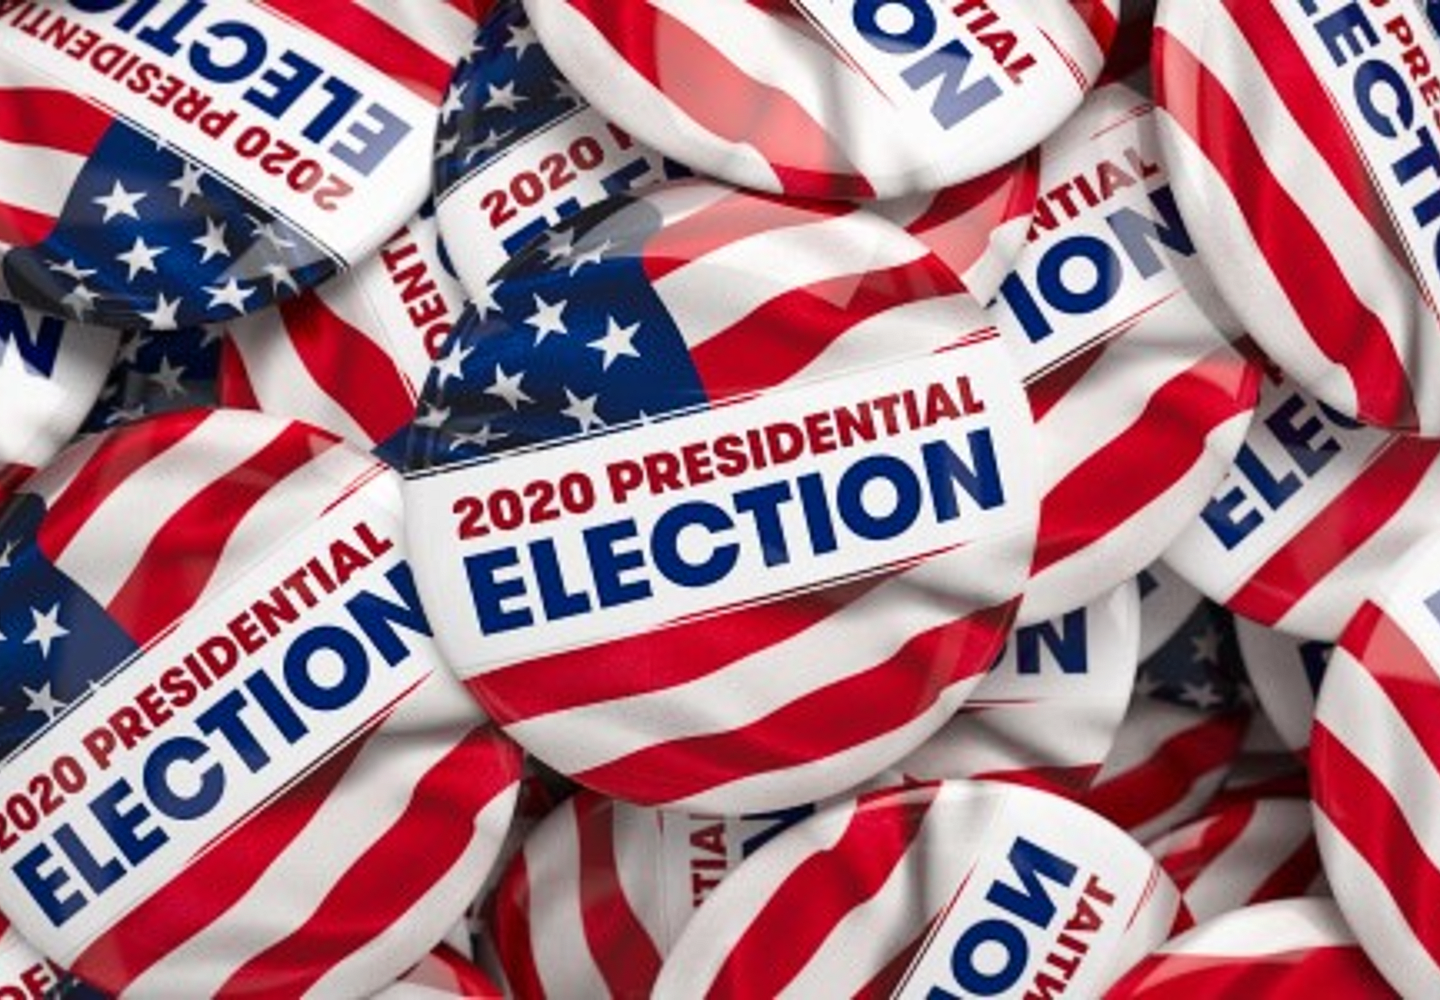 The 2020 U.S. Presidential Election: How Will It Affect U.S.-Japan Relations?